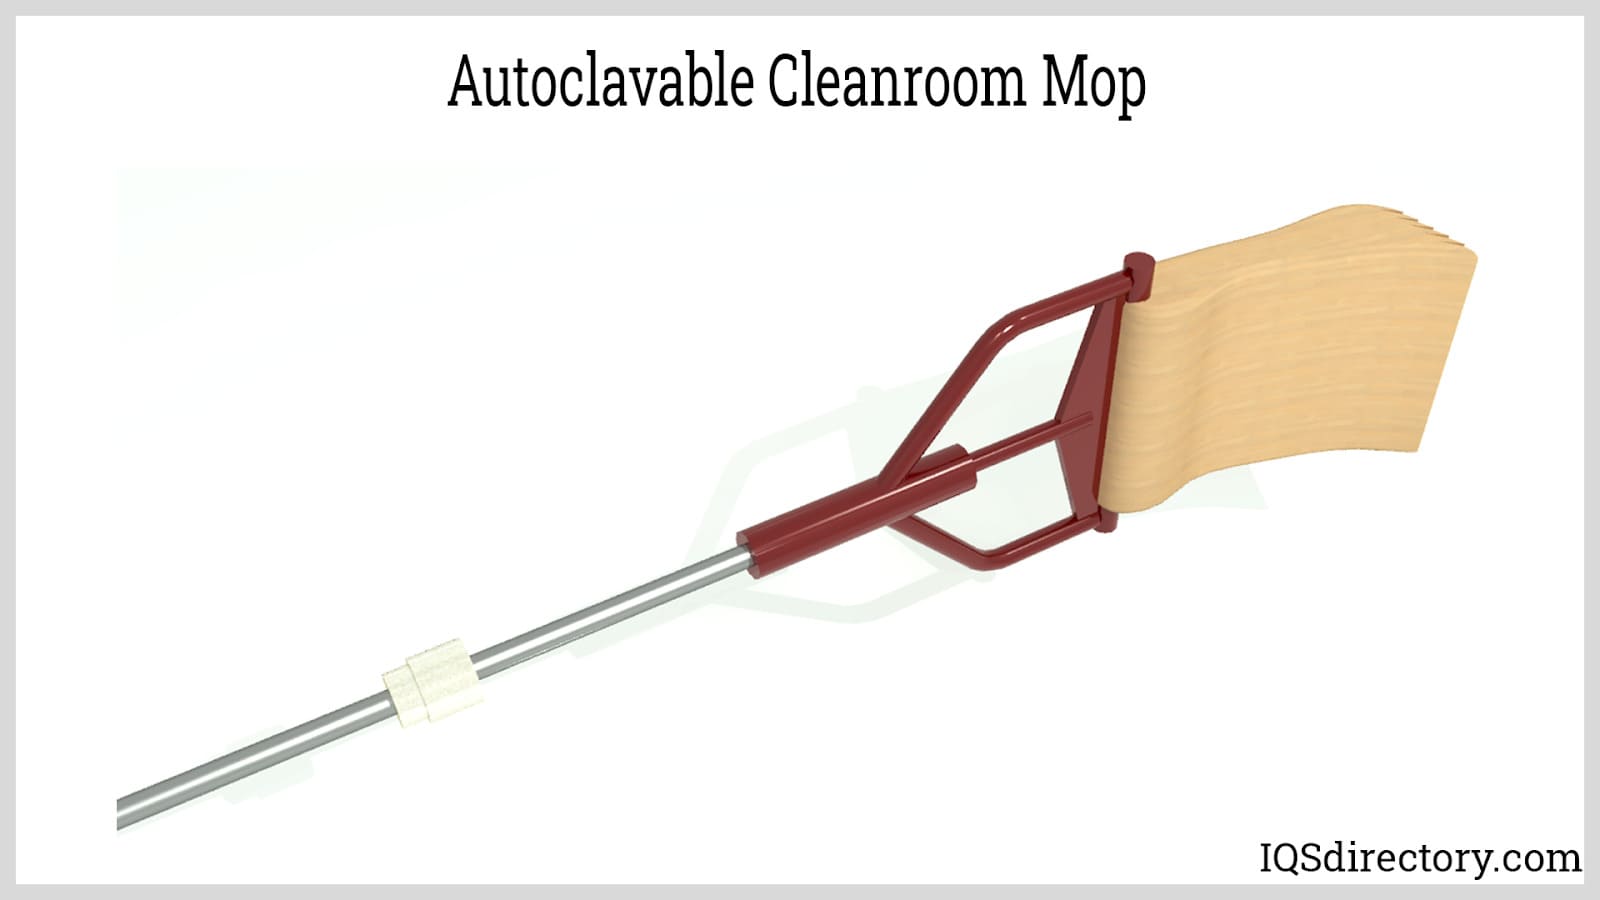 Autoclavable Cleanroom Mop